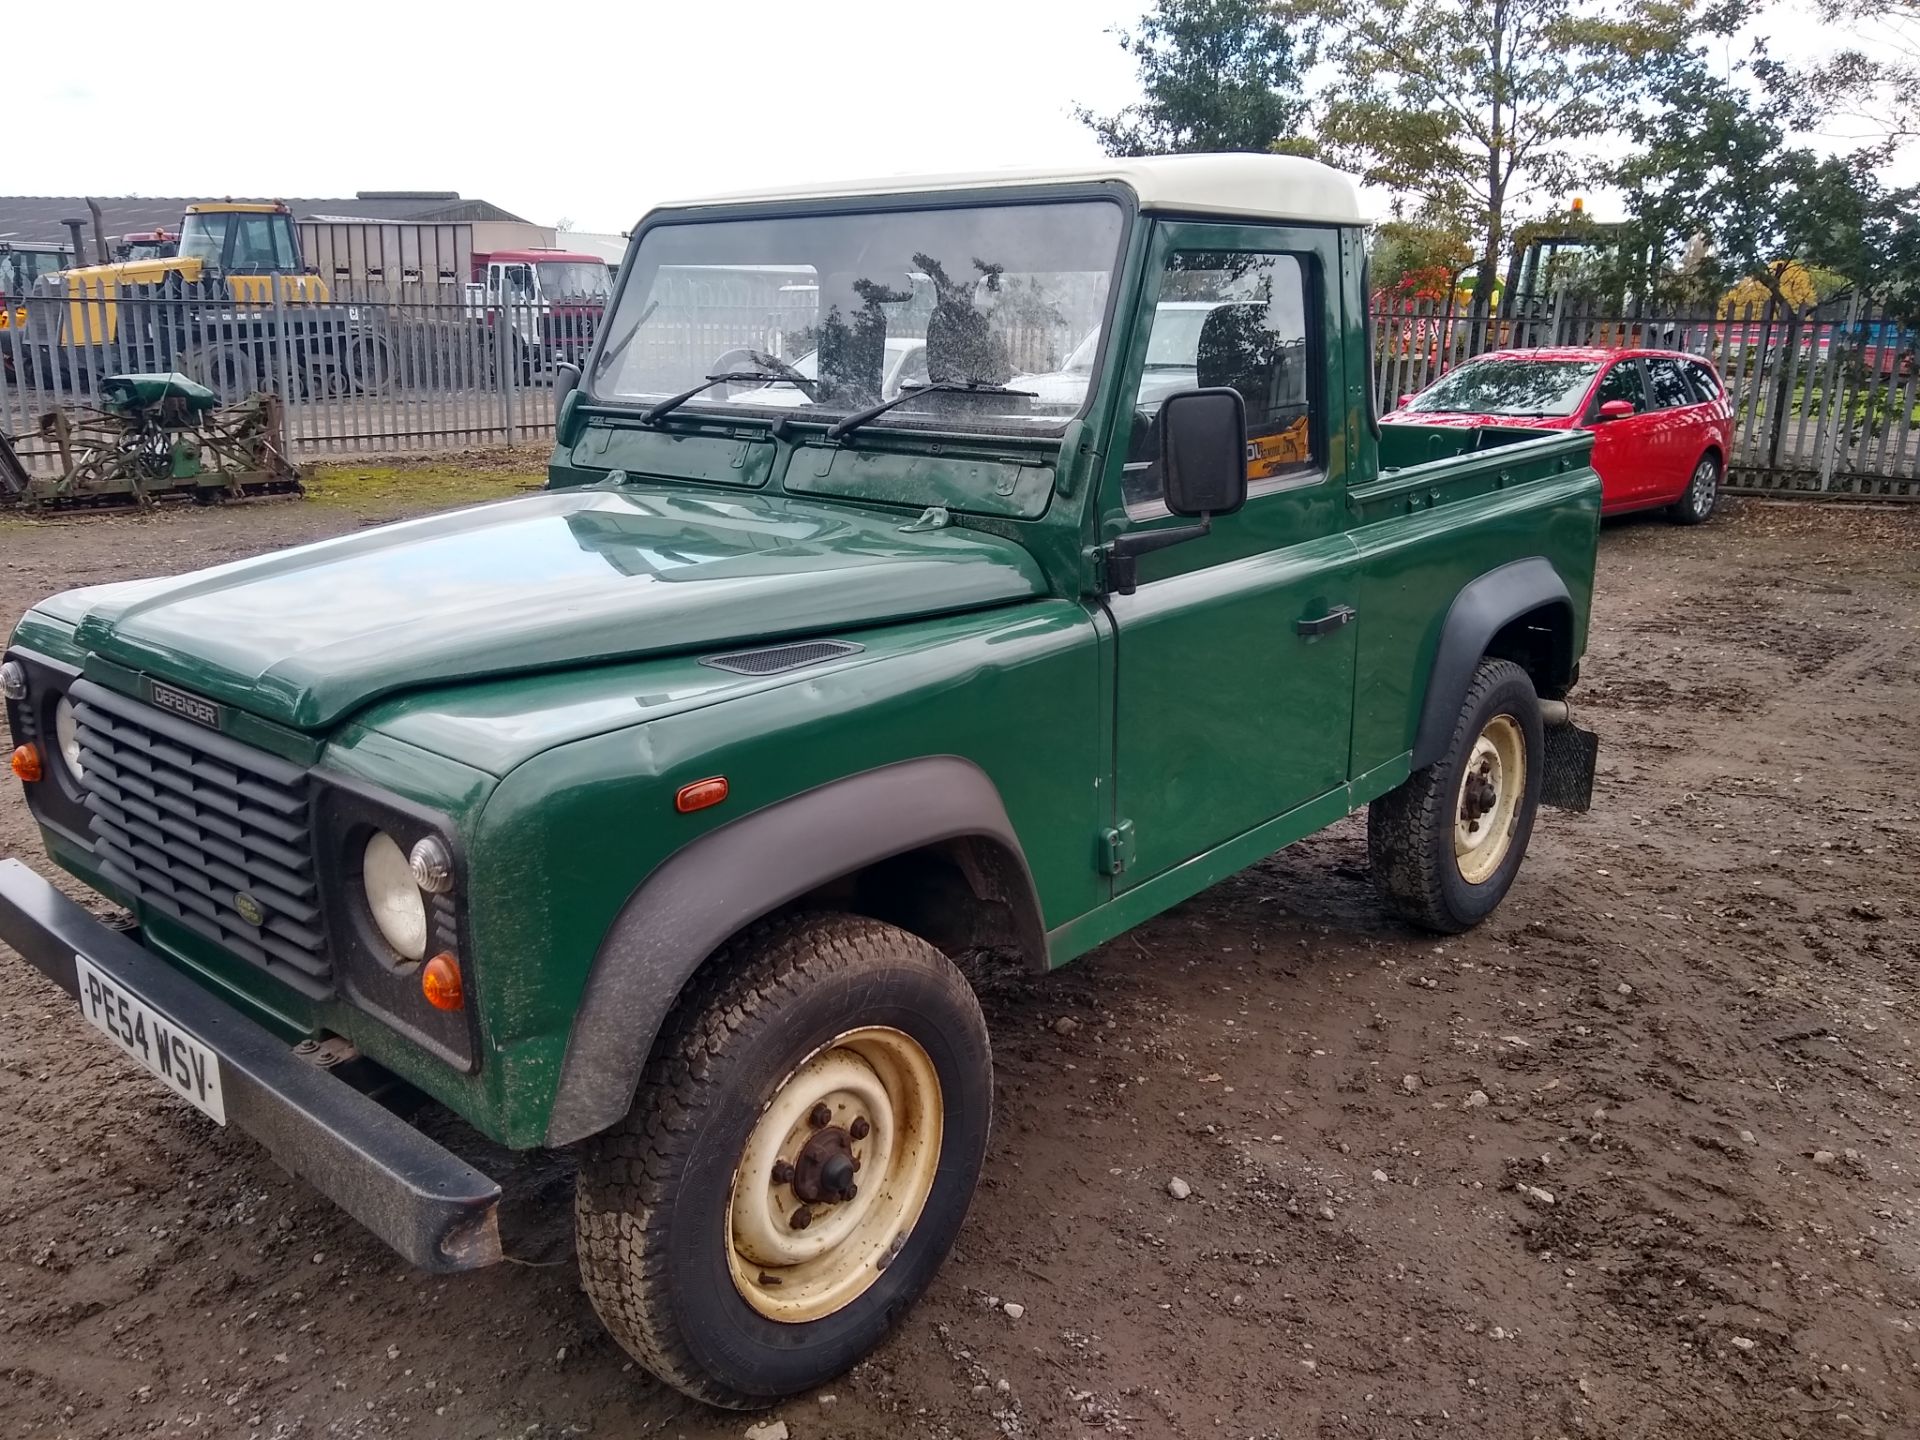 Landrover TD 90 pickup, 2004, one owner, MOT till May 2021, 103,105 miles, gc, PE54WSV - Image 8 of 8